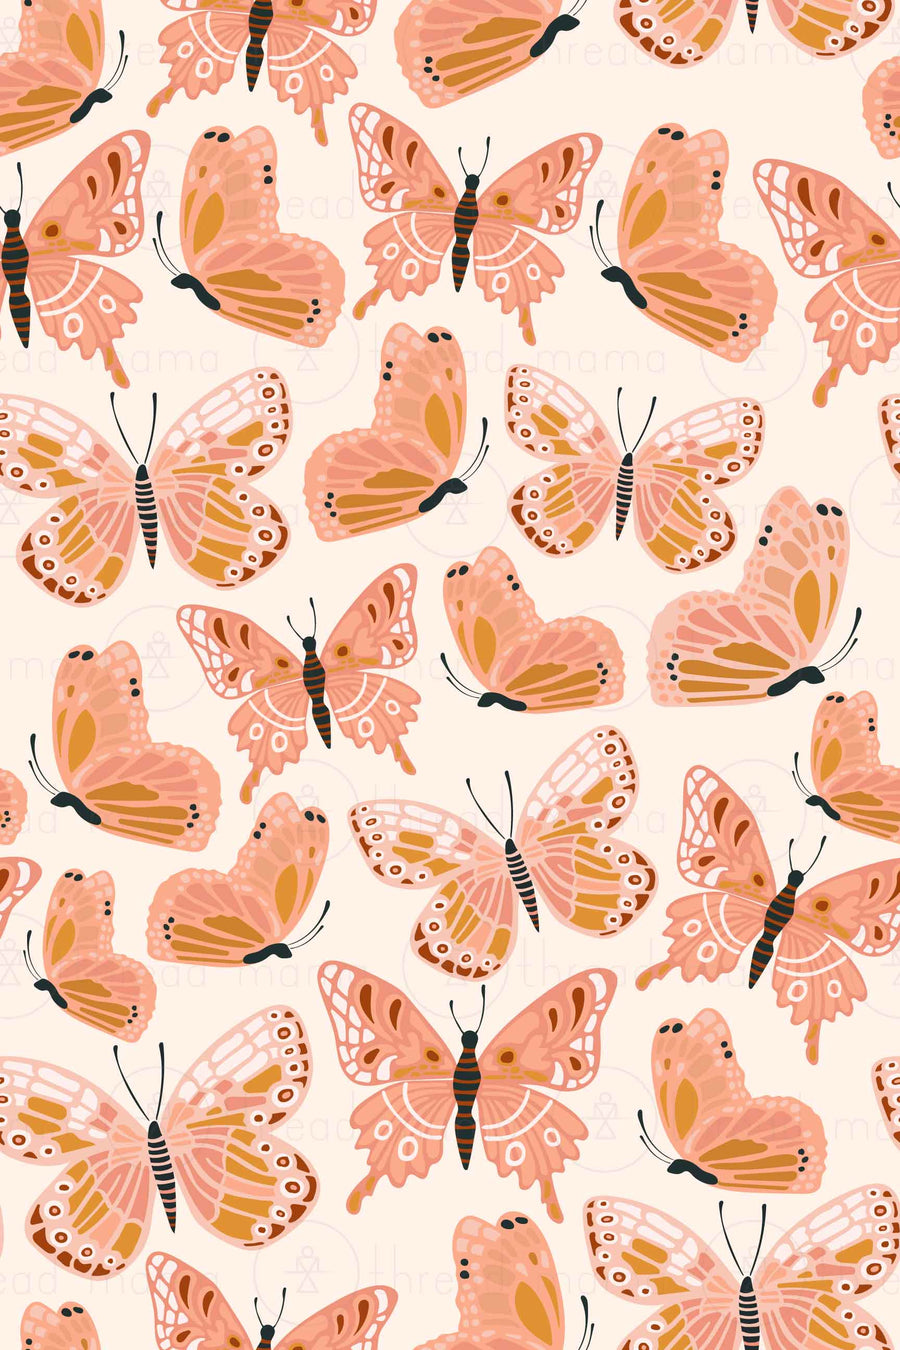 Repeating Pattern 52 (Seamless)